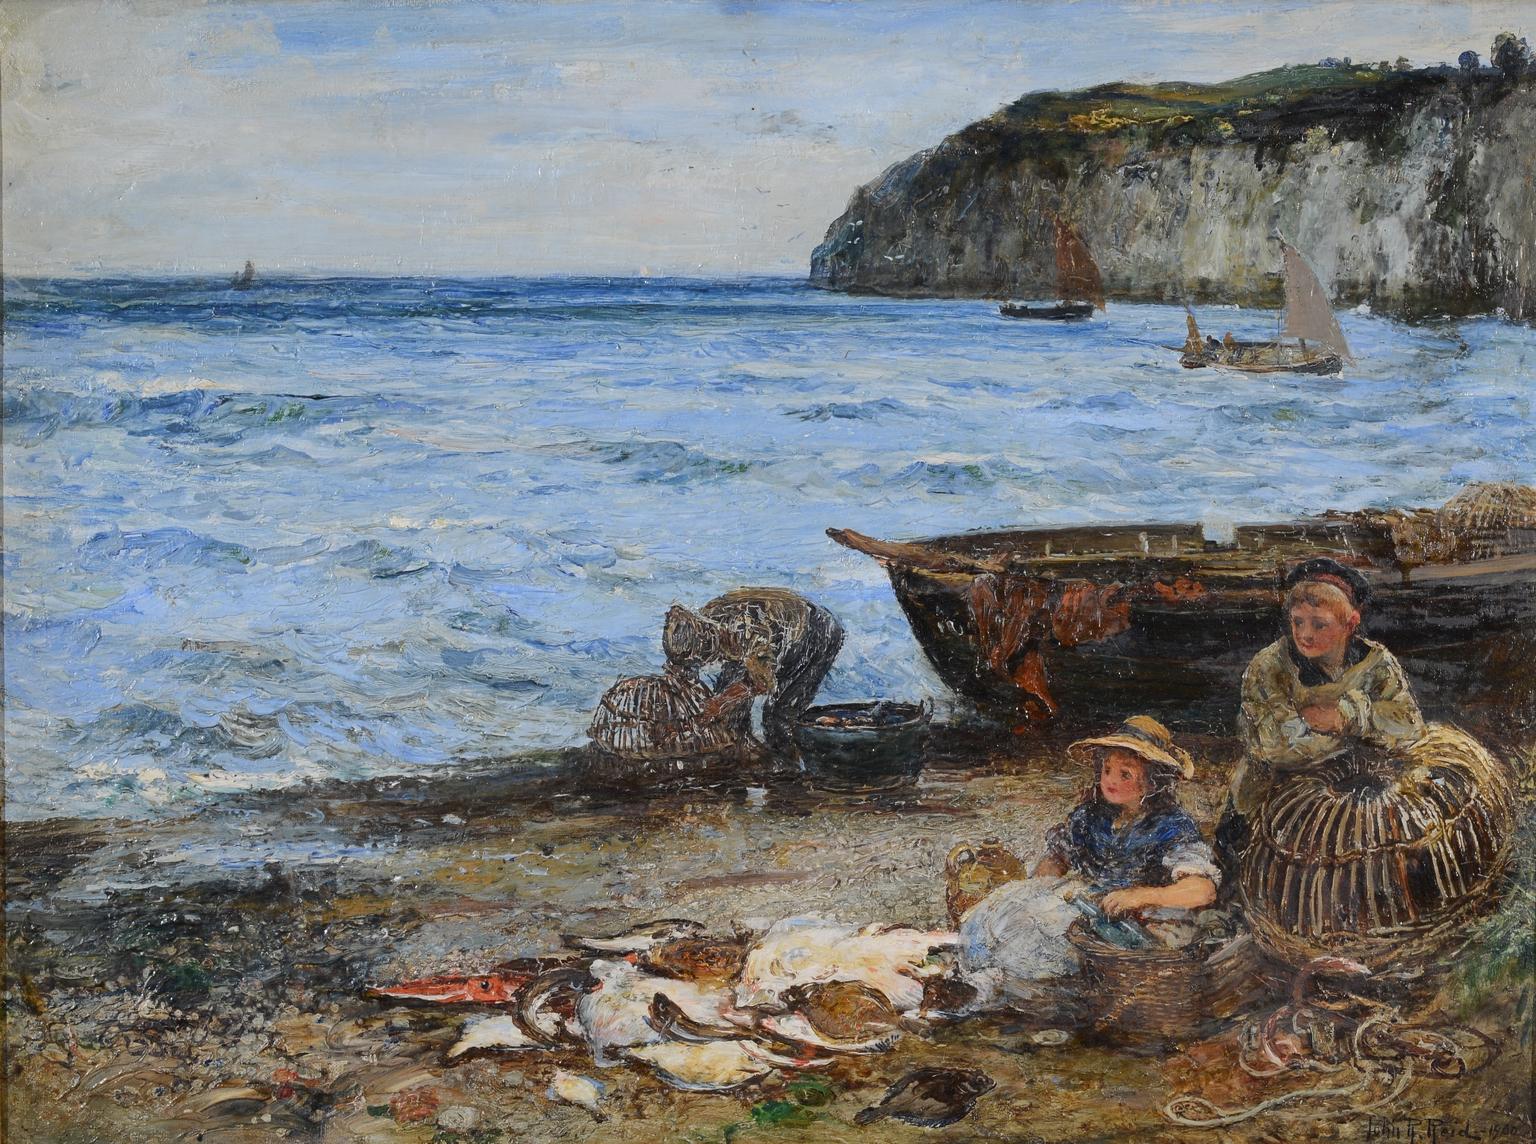 Fisherman and Children on the Beach sorting the catch